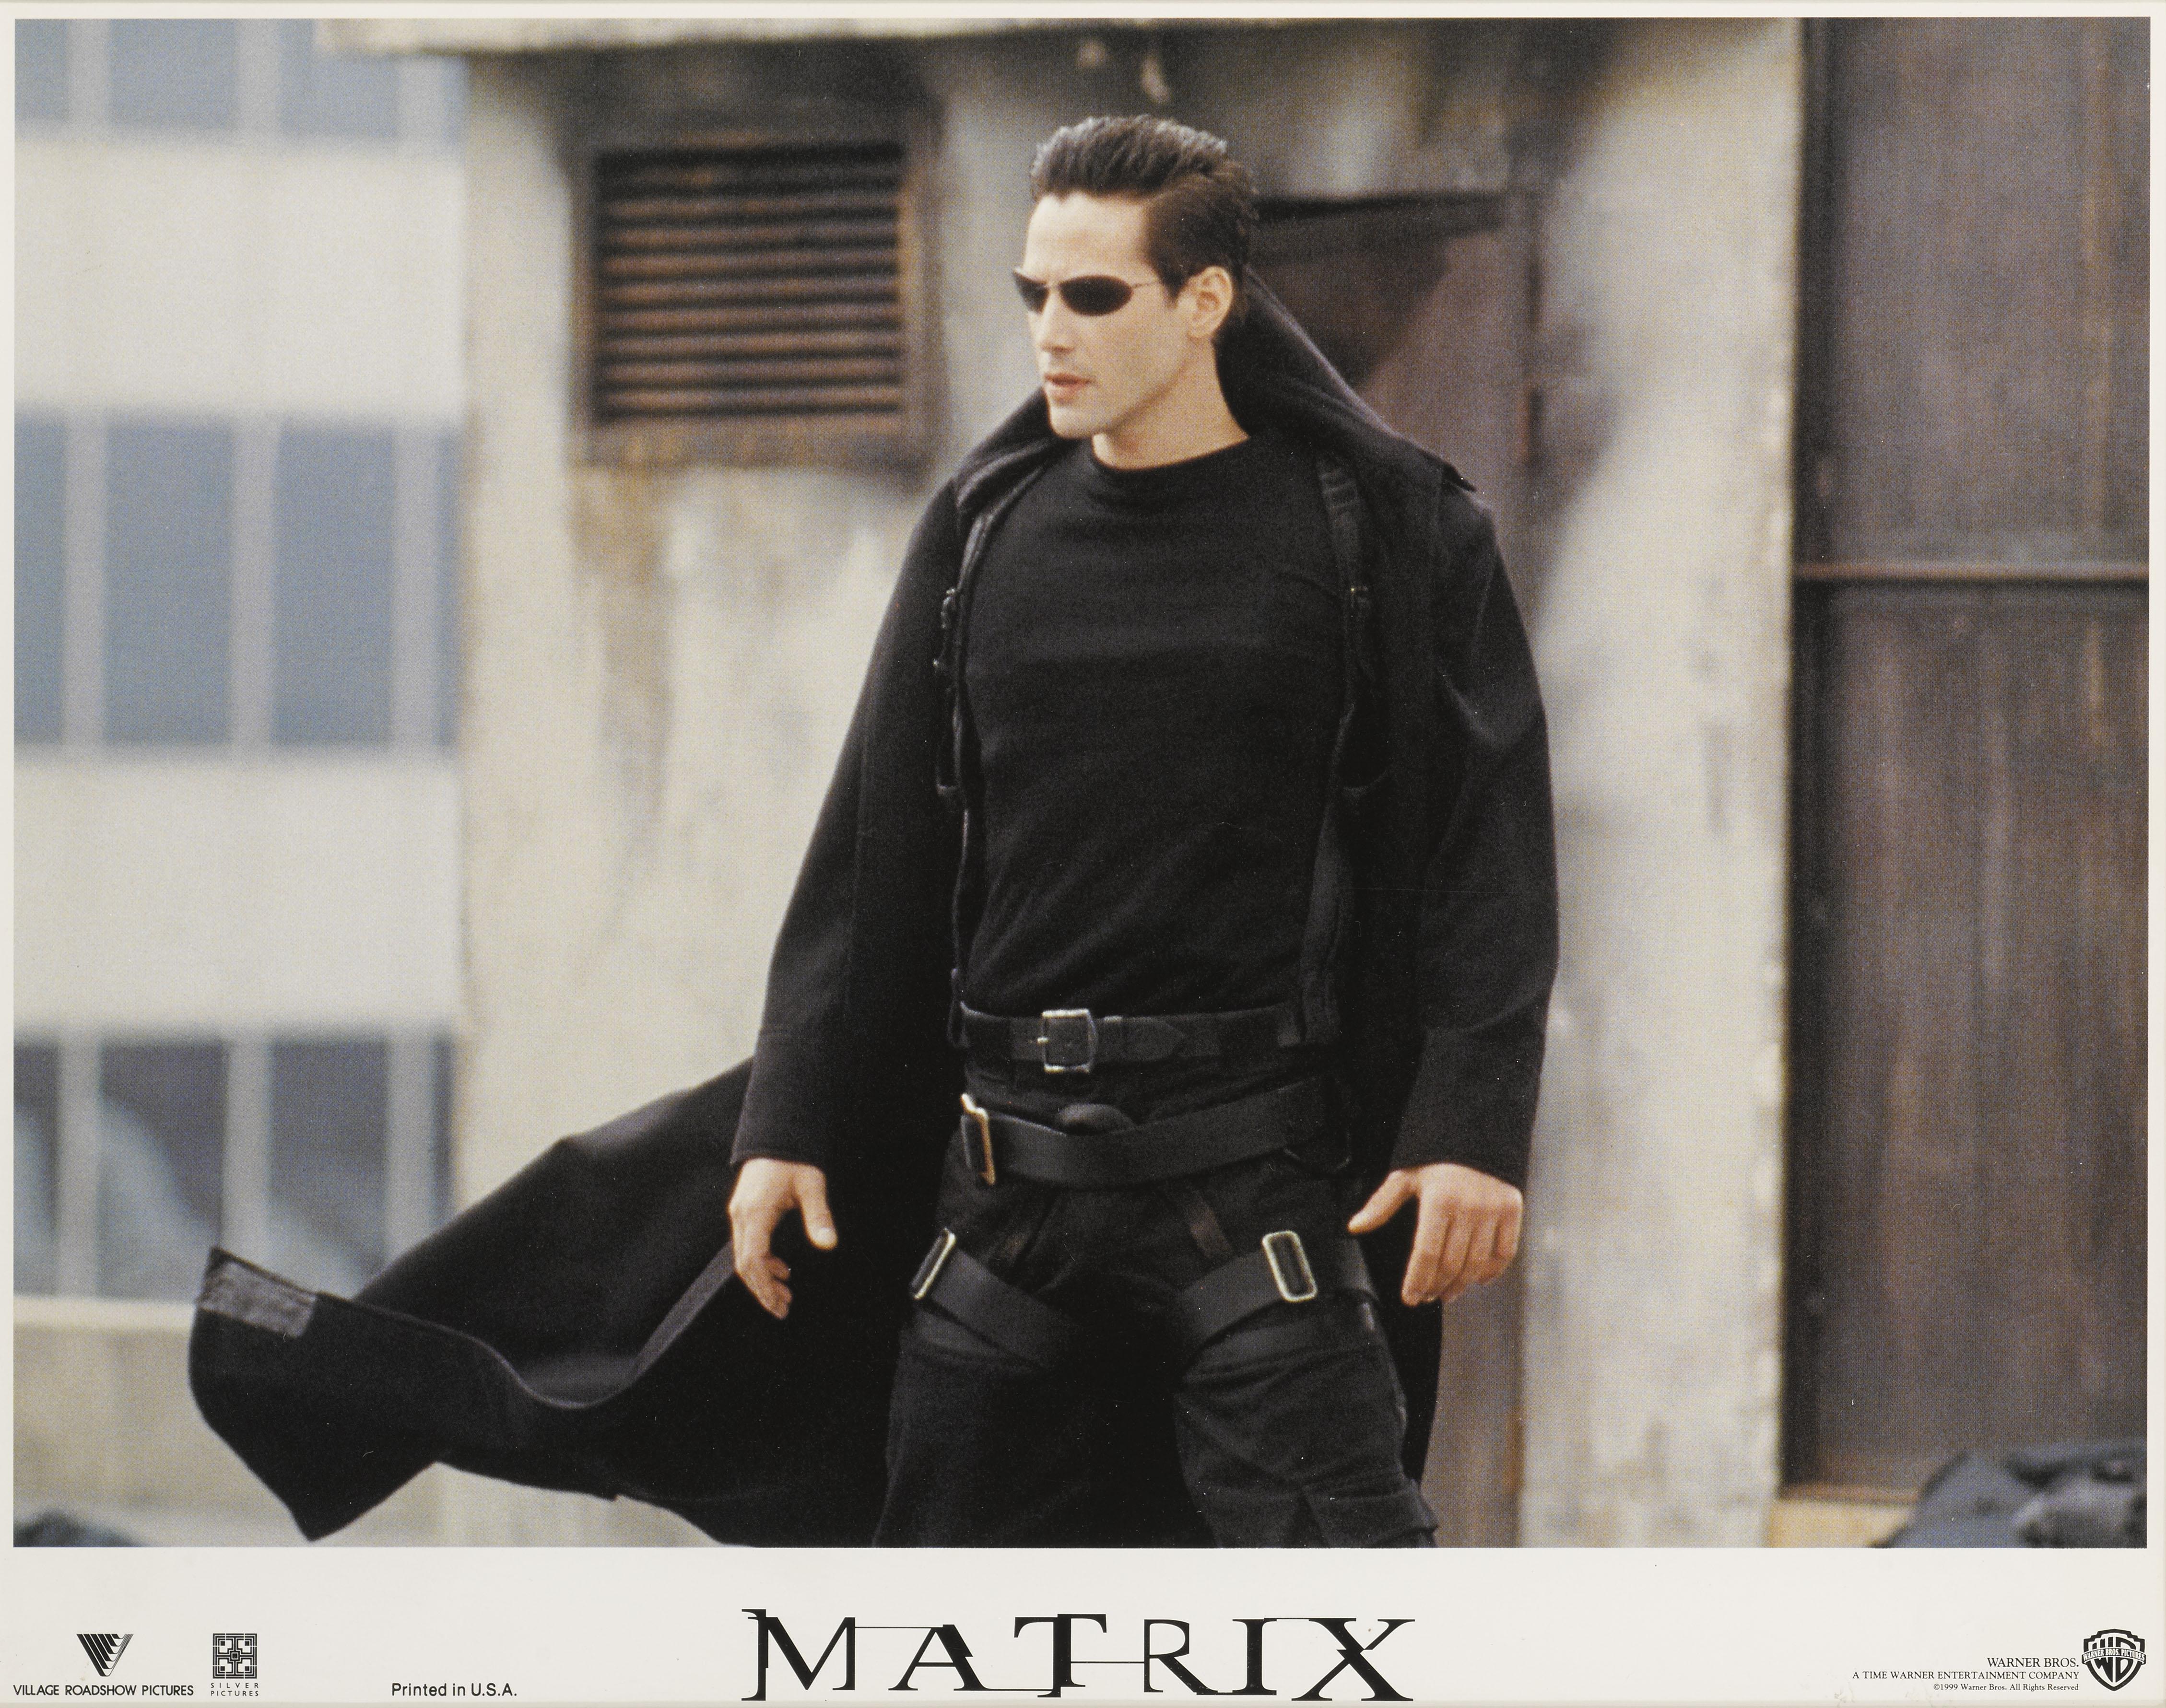 Original US Lobby card from the science fiction classic The Matrix, 1999.
This cool lobby card shows the Keanu Reeves (Neo)
The film was directed by Andy Wachowski & Lana Wachowski.
This lobby card is conservation framed in an obeche wood framed